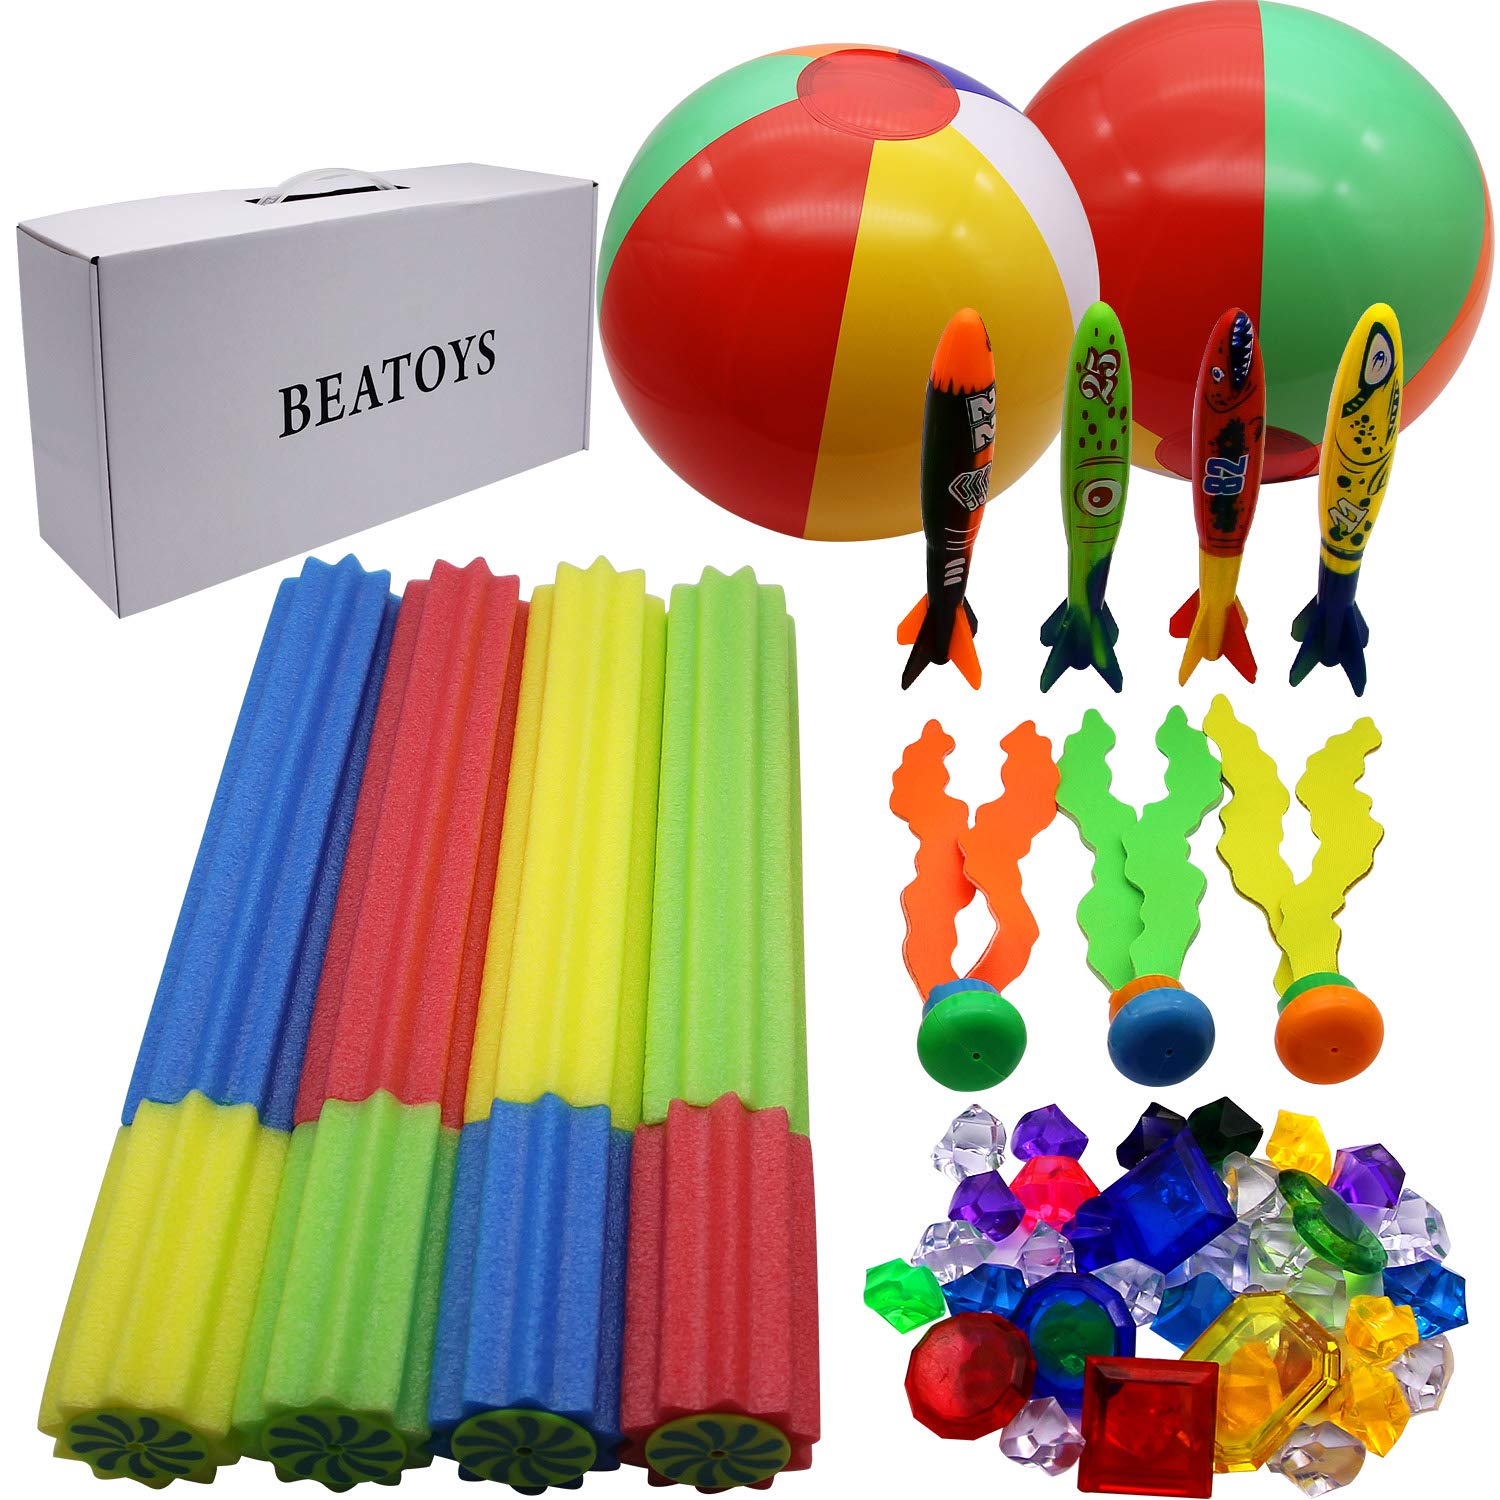 JOINBO BEATOYS 41 PCS Summer Diving Sets with 4 Water Blaster, 4 Torpedoes, 3 Diving Seaweeds, 2 Beach Balls, 8 gems and 20 Diving Jewels